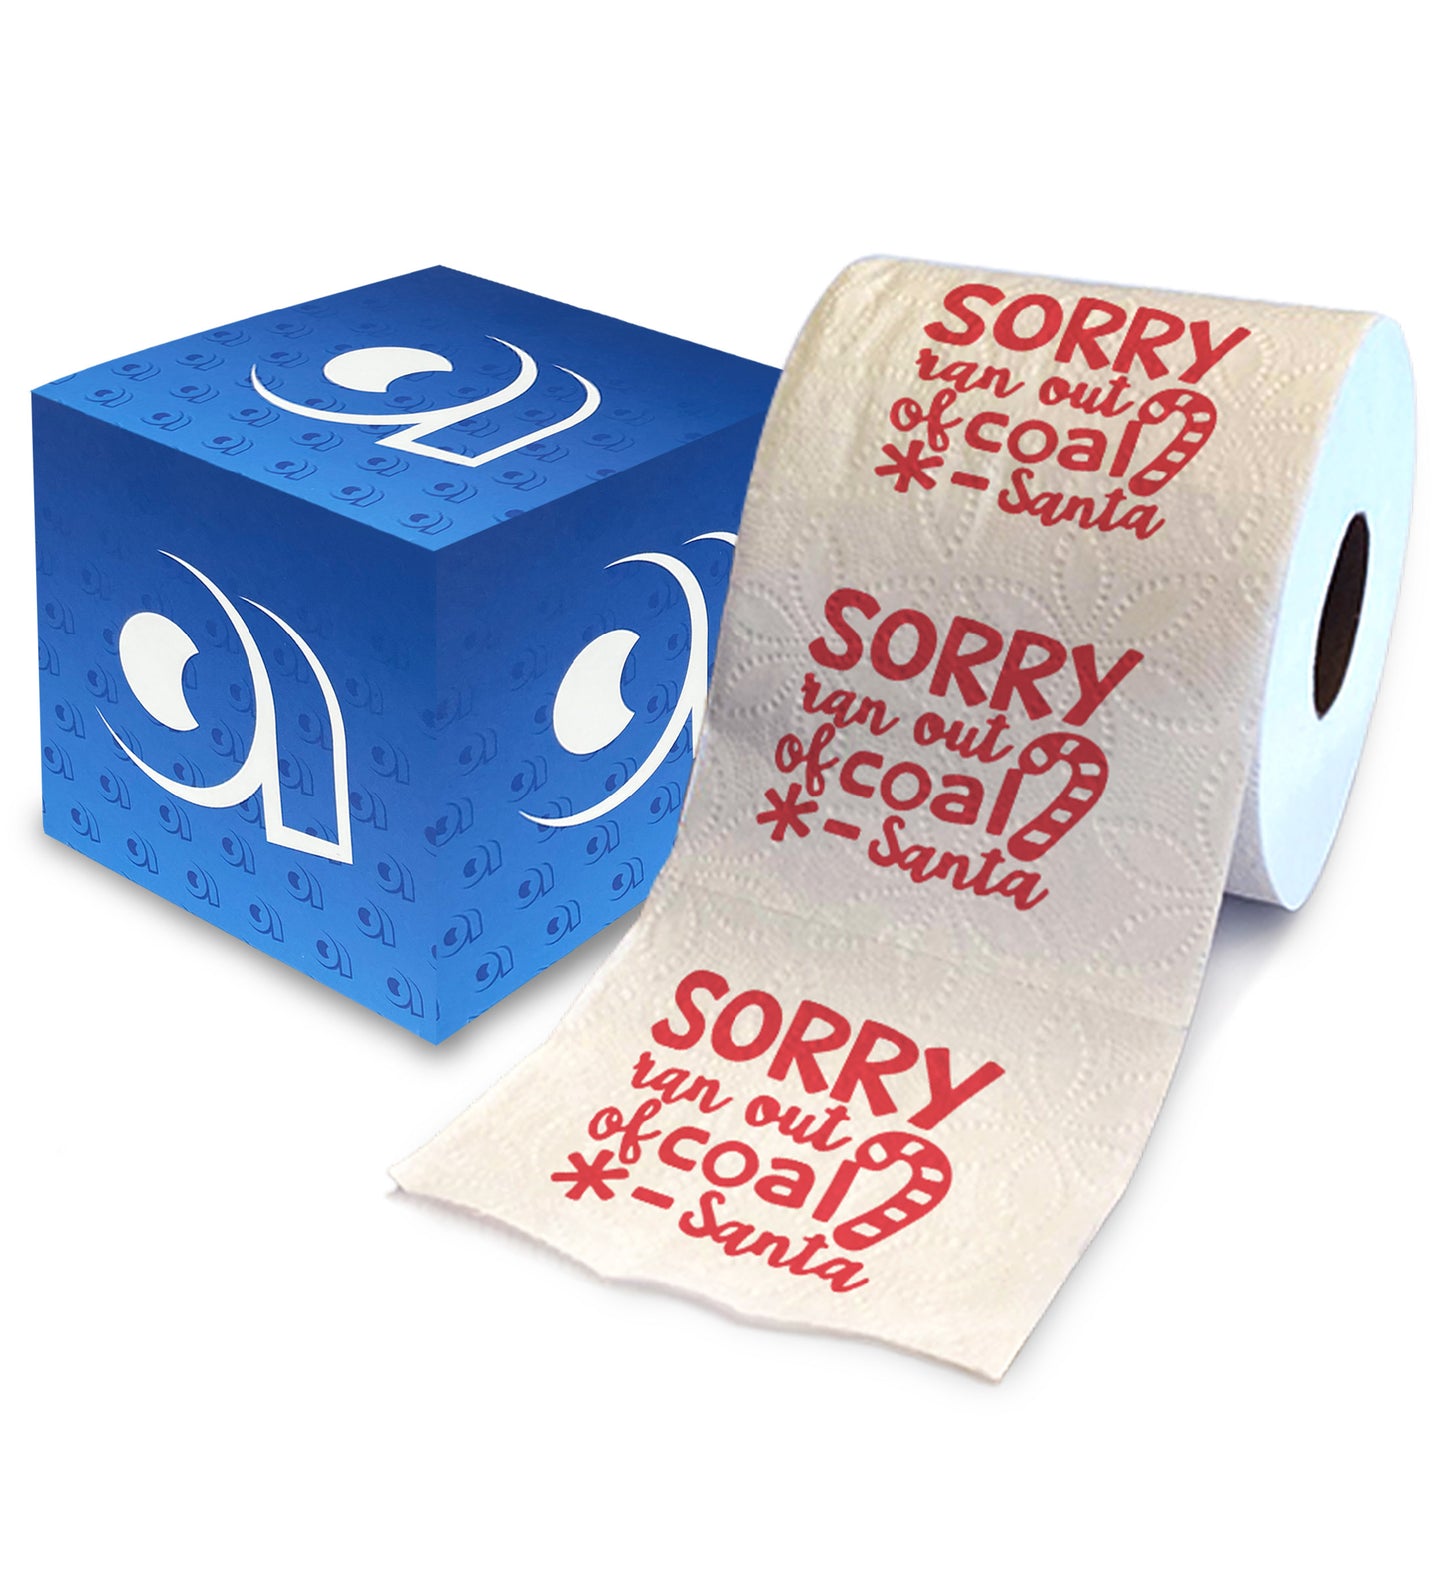 Printed TP Sorry Ran Out of Coal Christmas Toilet Paper Roll Holiday Gift